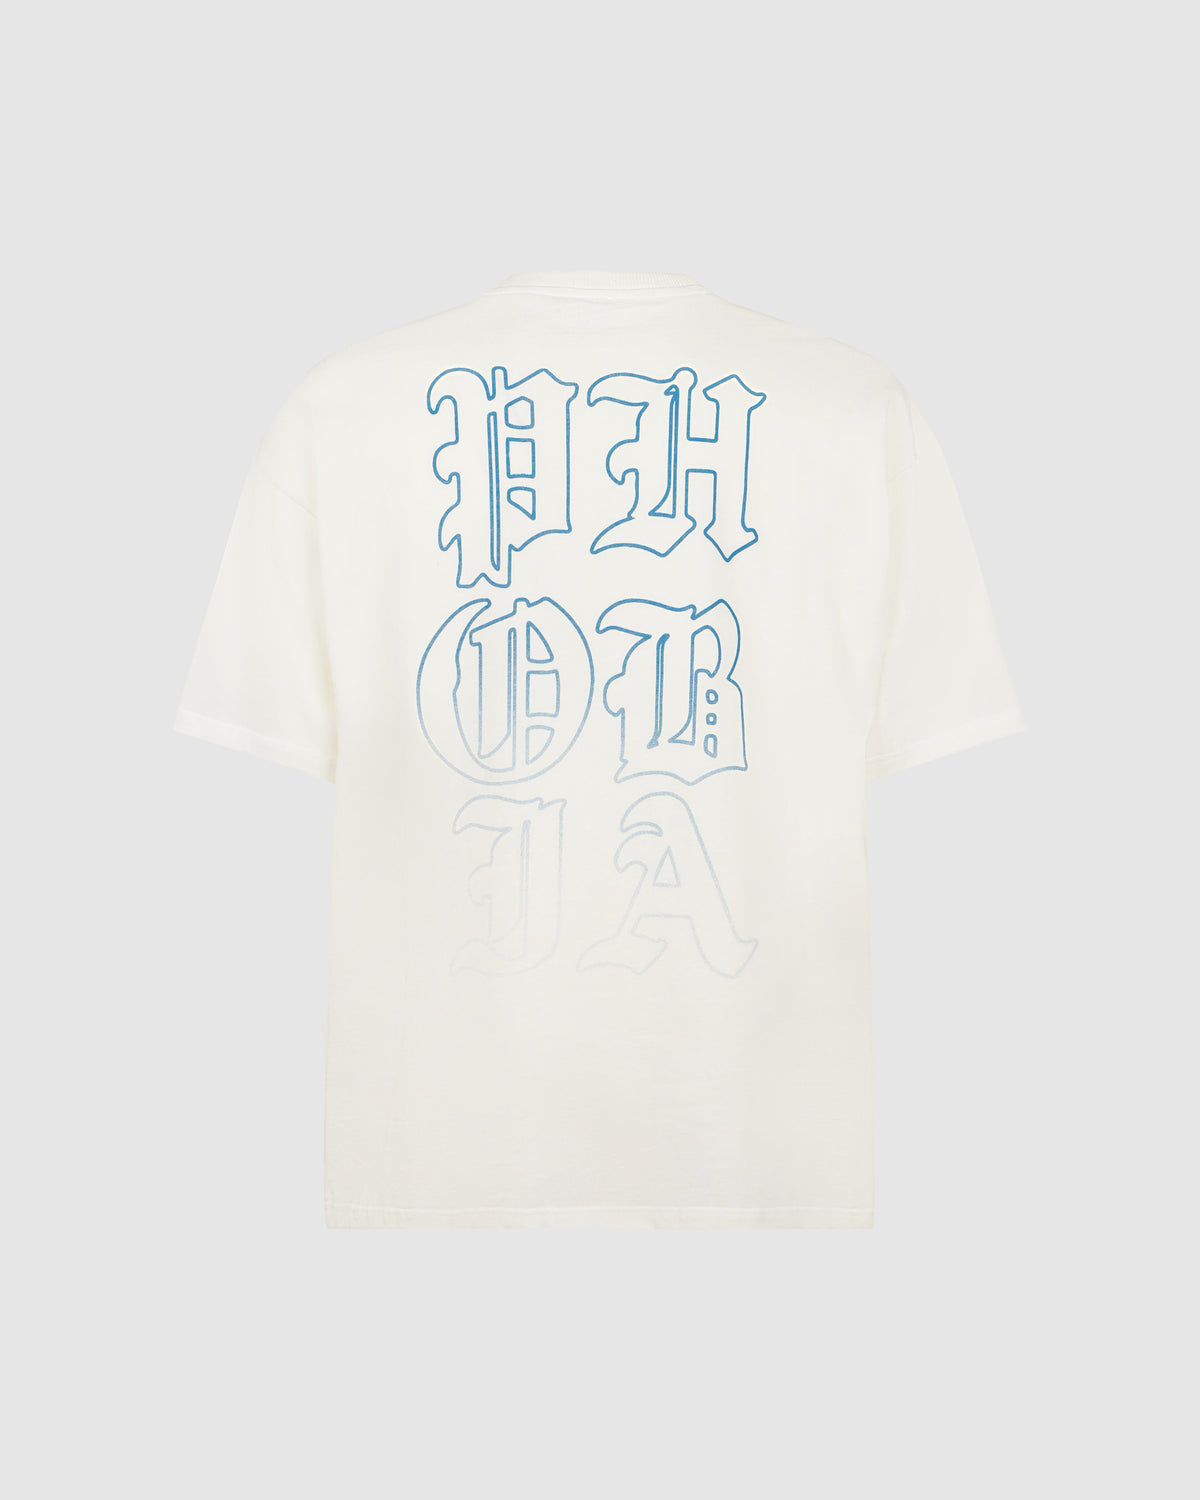 PHOBIA OFF WHITE T-SHIRT WITH LIGHT BLUE MOUTH PRINT